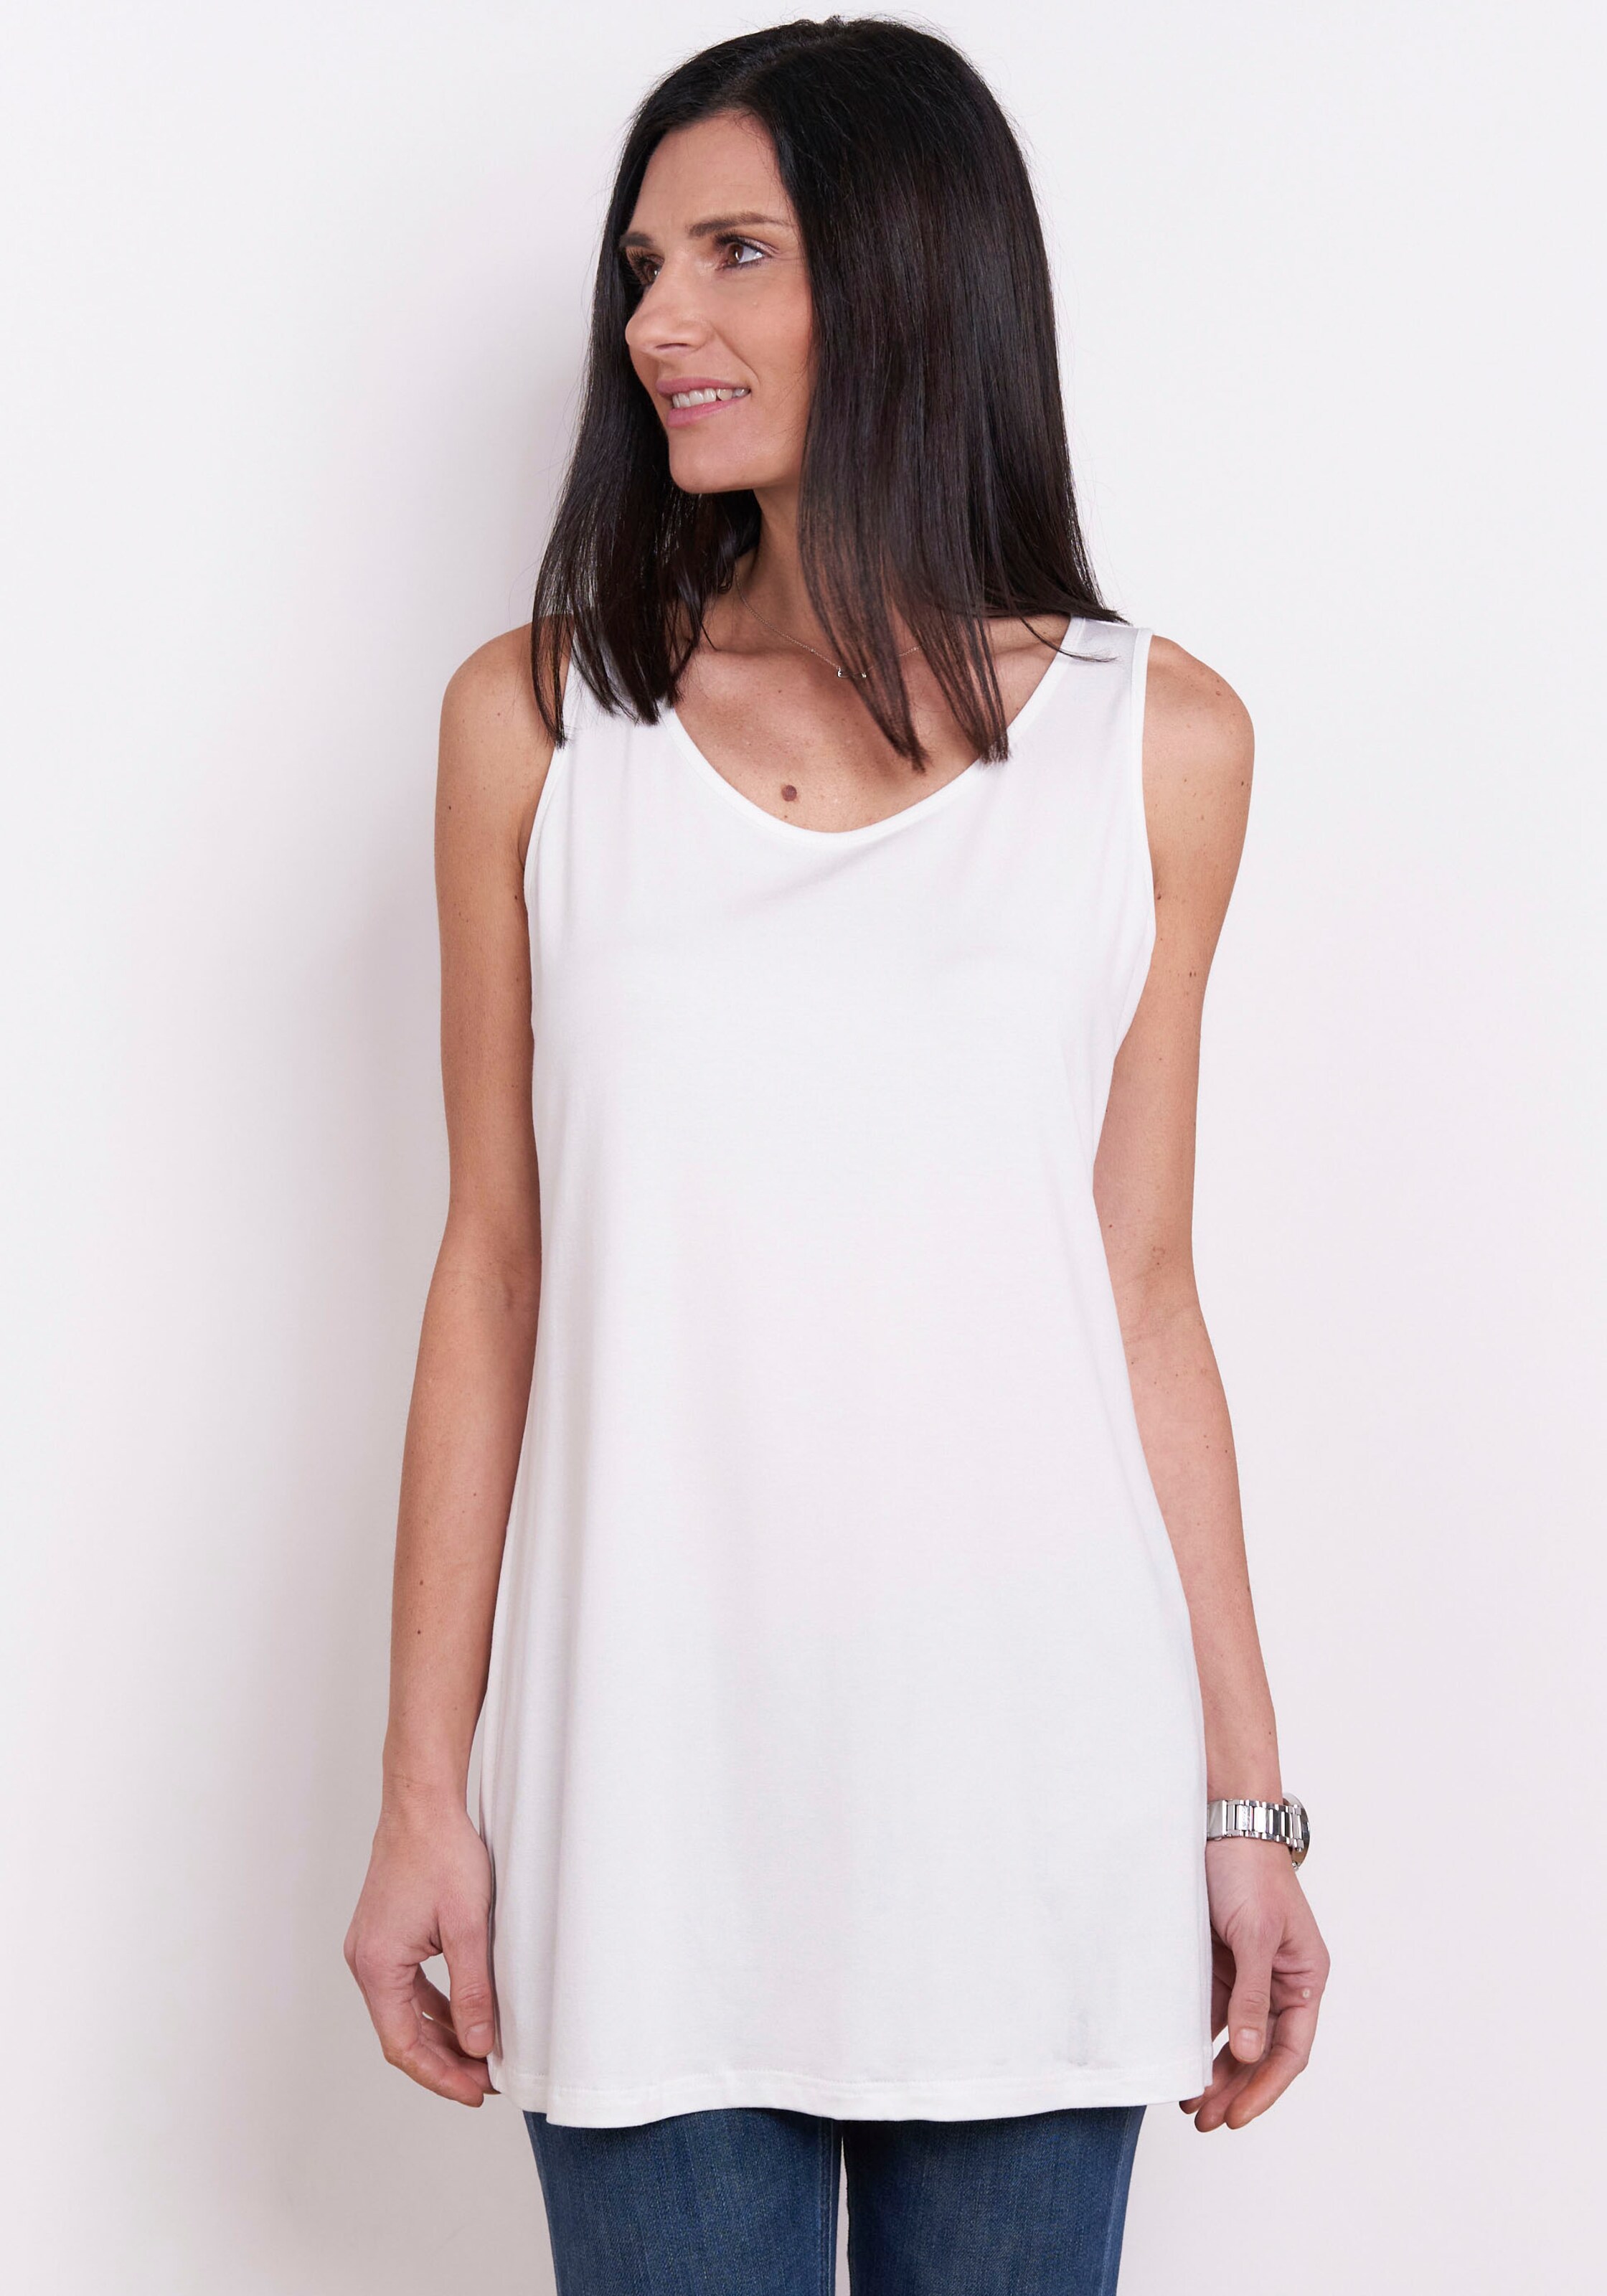 Seidel Moden Top in Offwhite | ABOUT YOU